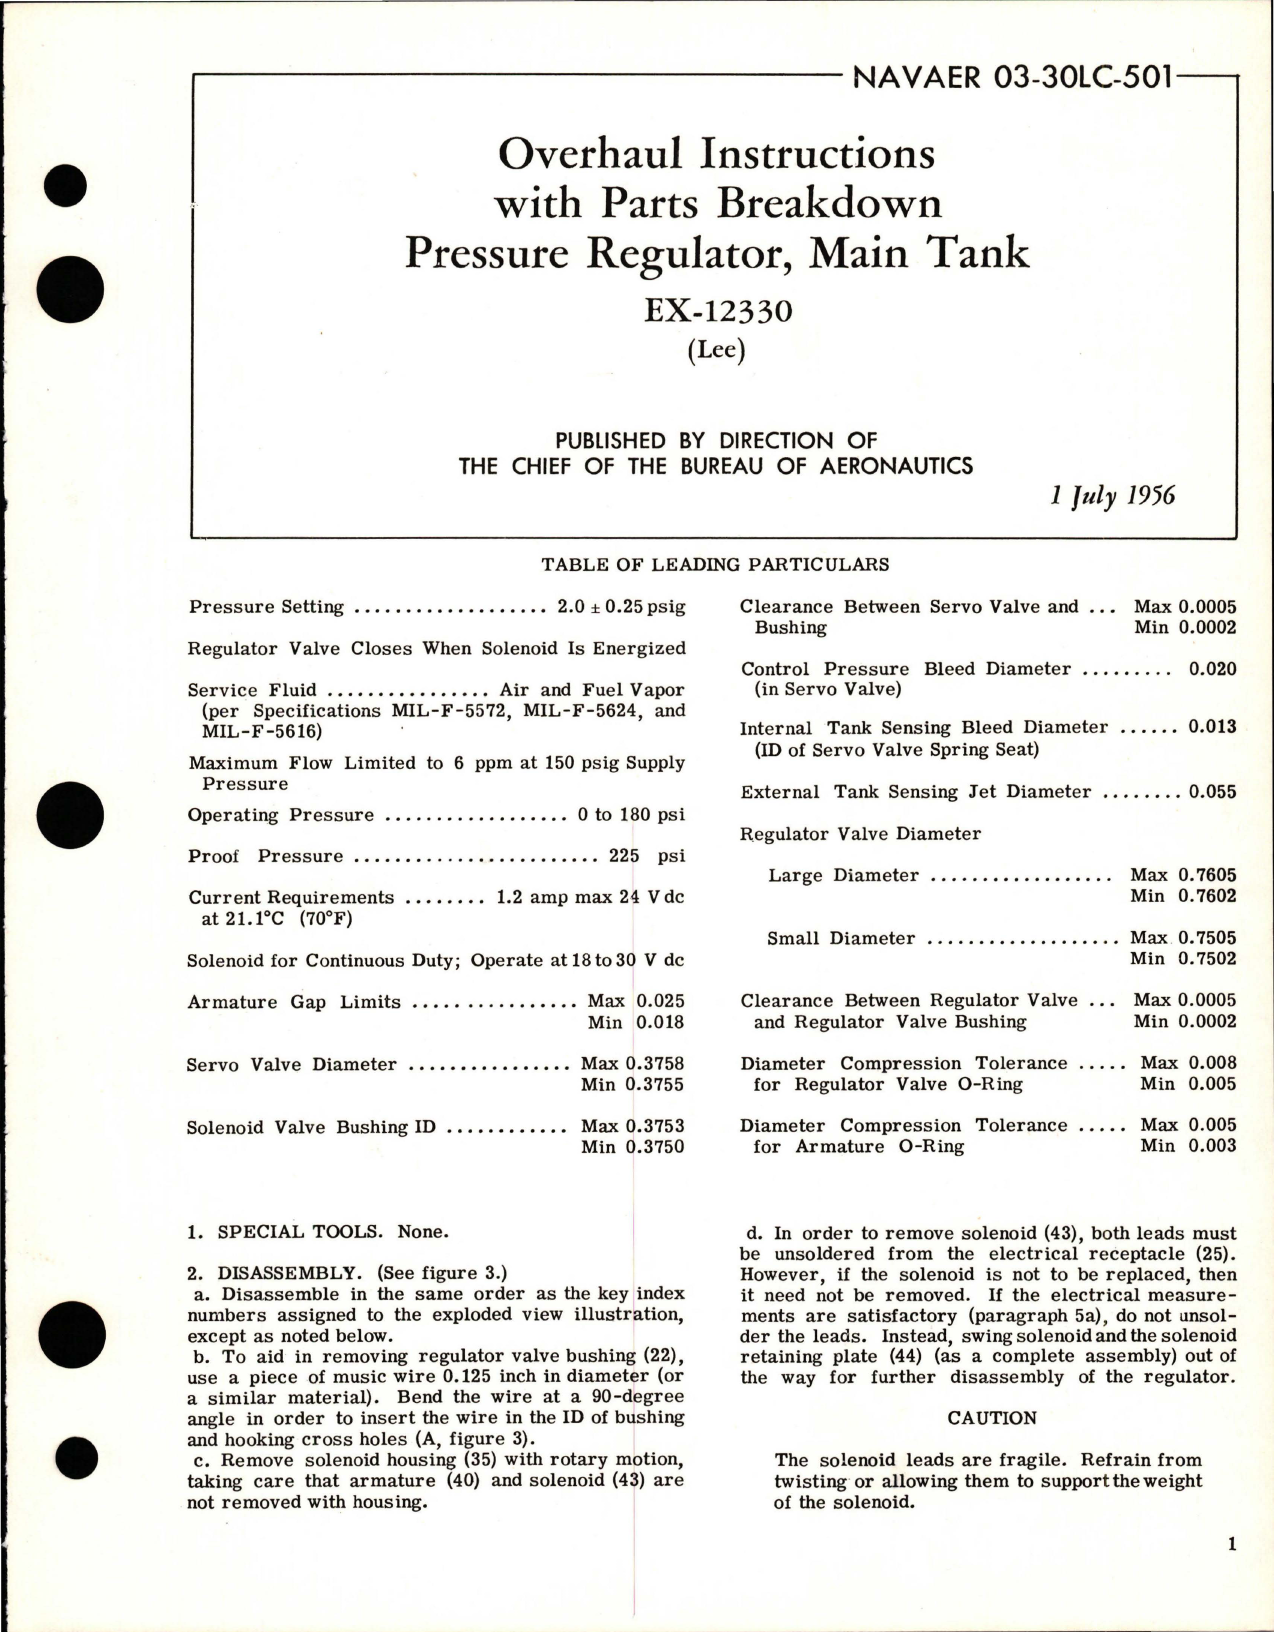 Sample page 1 from AirCorps Library document: Overhaul Instructions with Parts Breakdown for Main Tank Pressure Regulator - EX-12330 